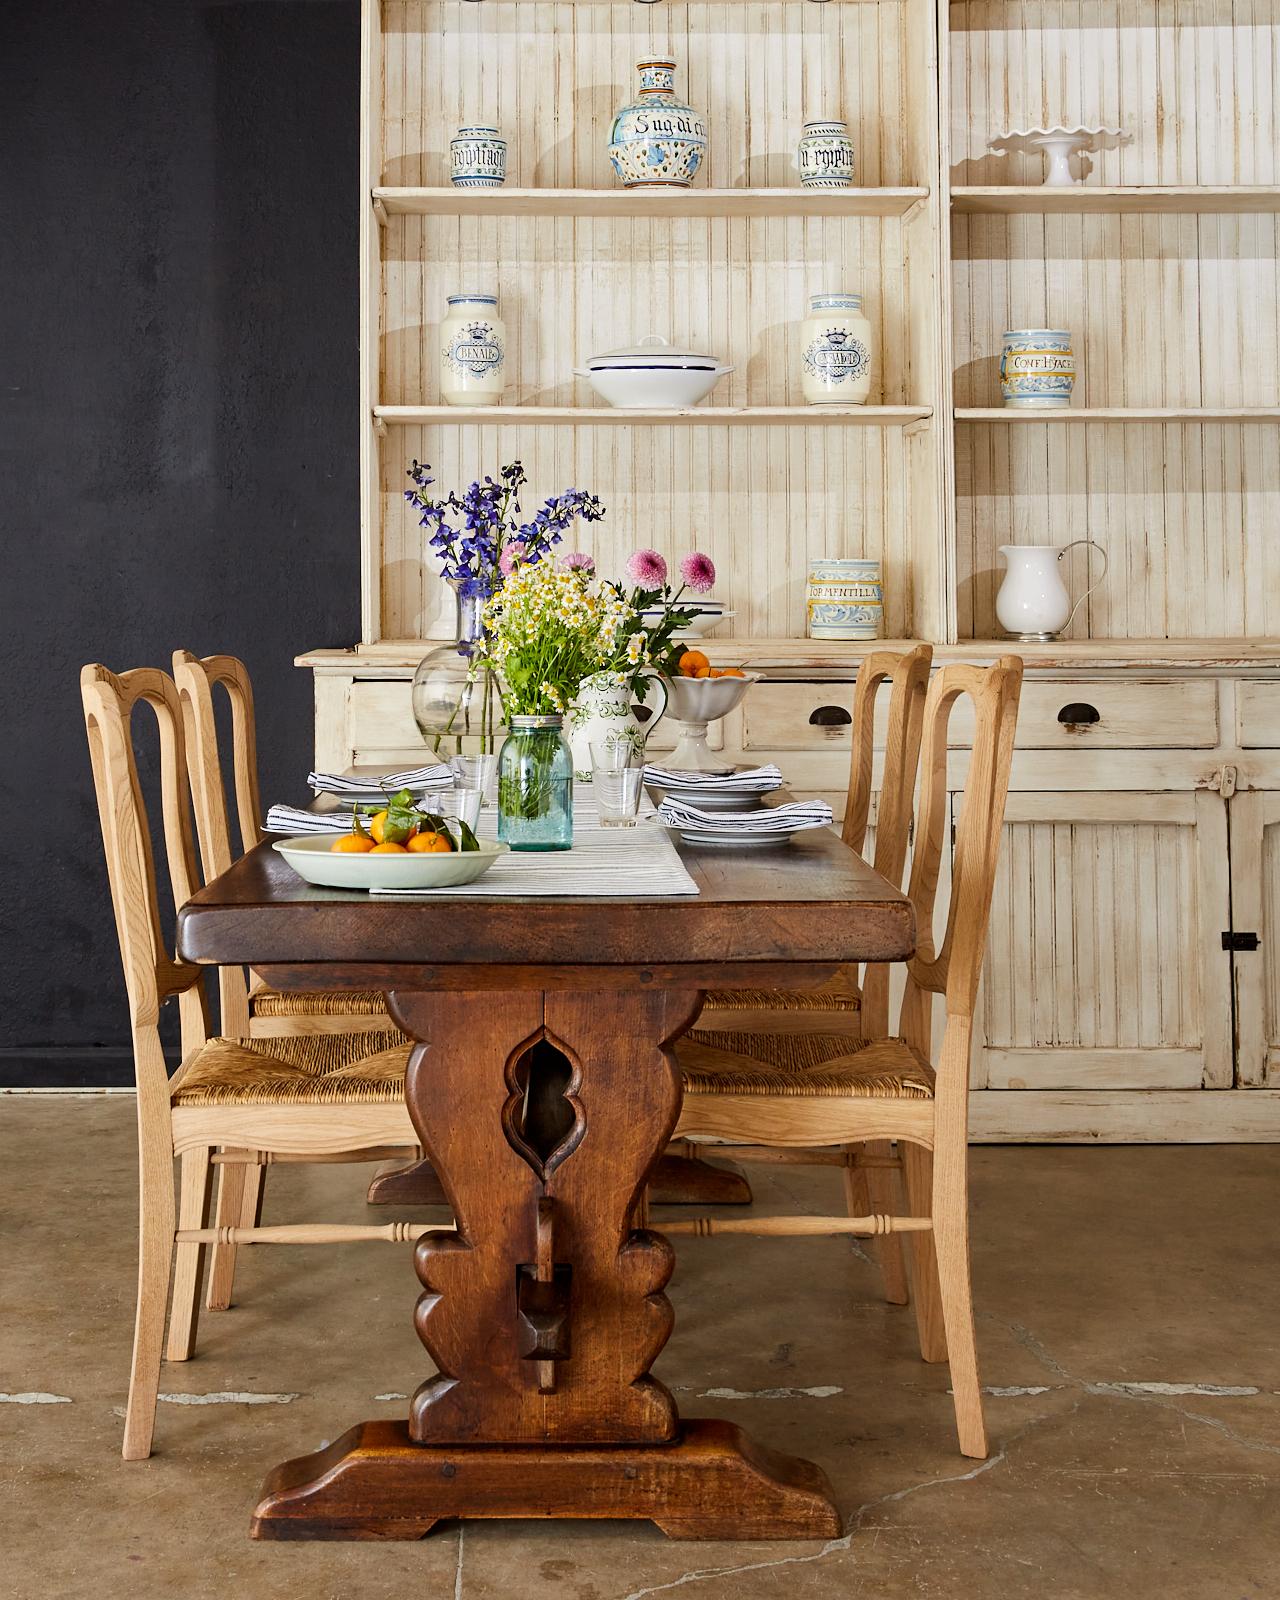 Rustic set of six oak dining chairs with rush seats made in the country French provincial taste. The chairs feature a bleached oak finish with a natural patina that showcases the lovely woodgrain patterns of the oak. The carved frames have